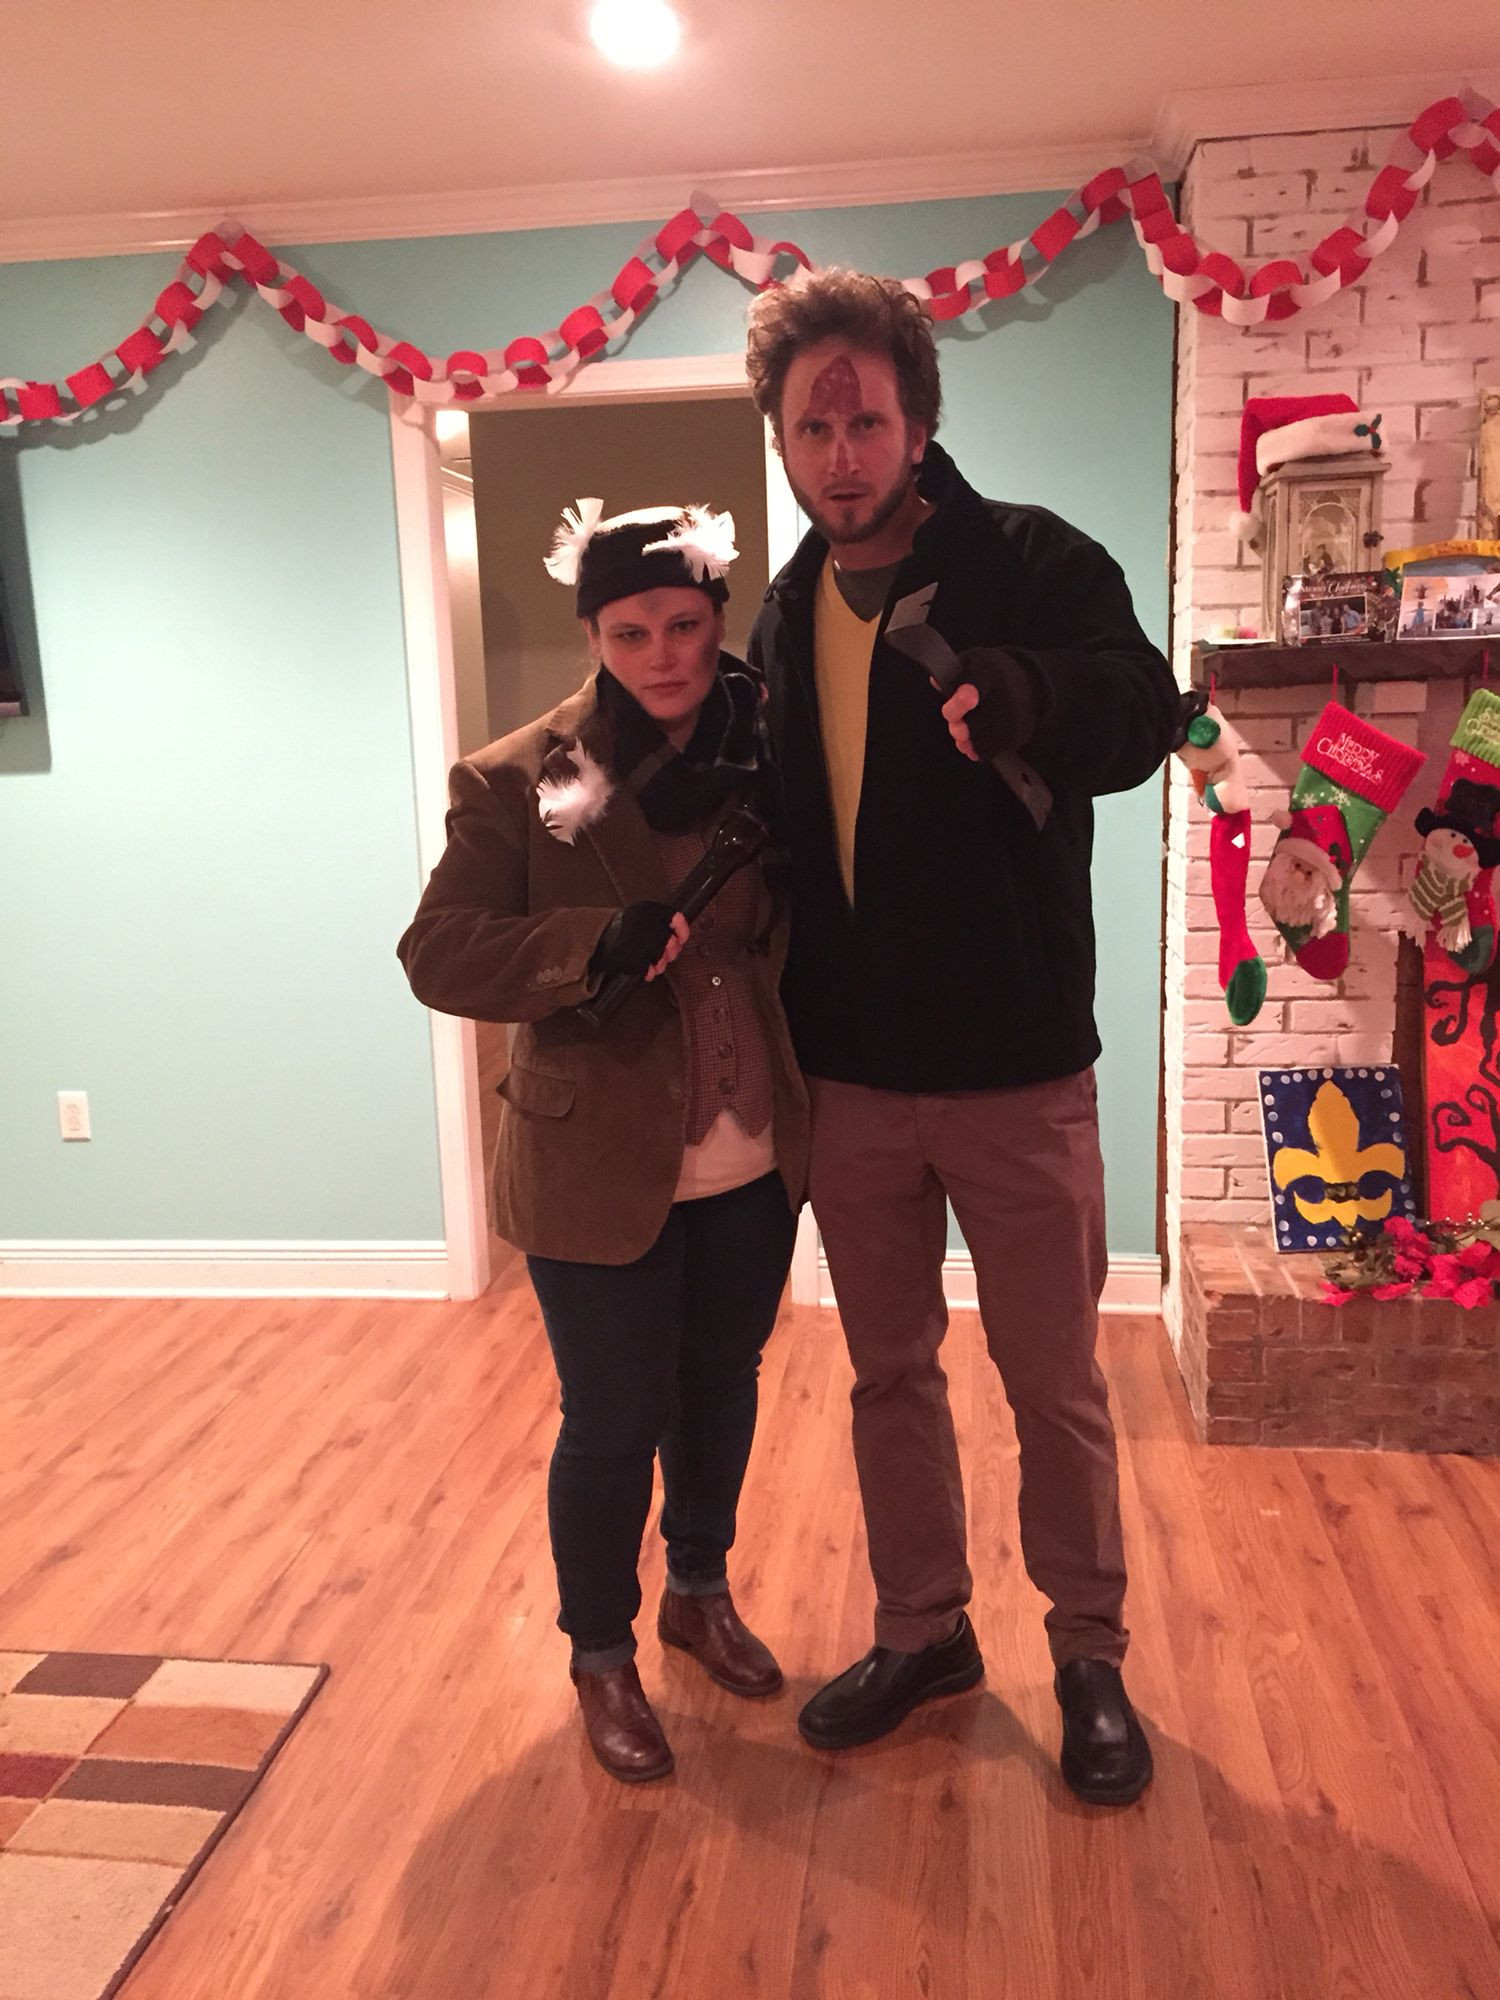 Holiday Party Costume Ideas
 Adult Couple Costume Party Christmas Movie Theme "Harry